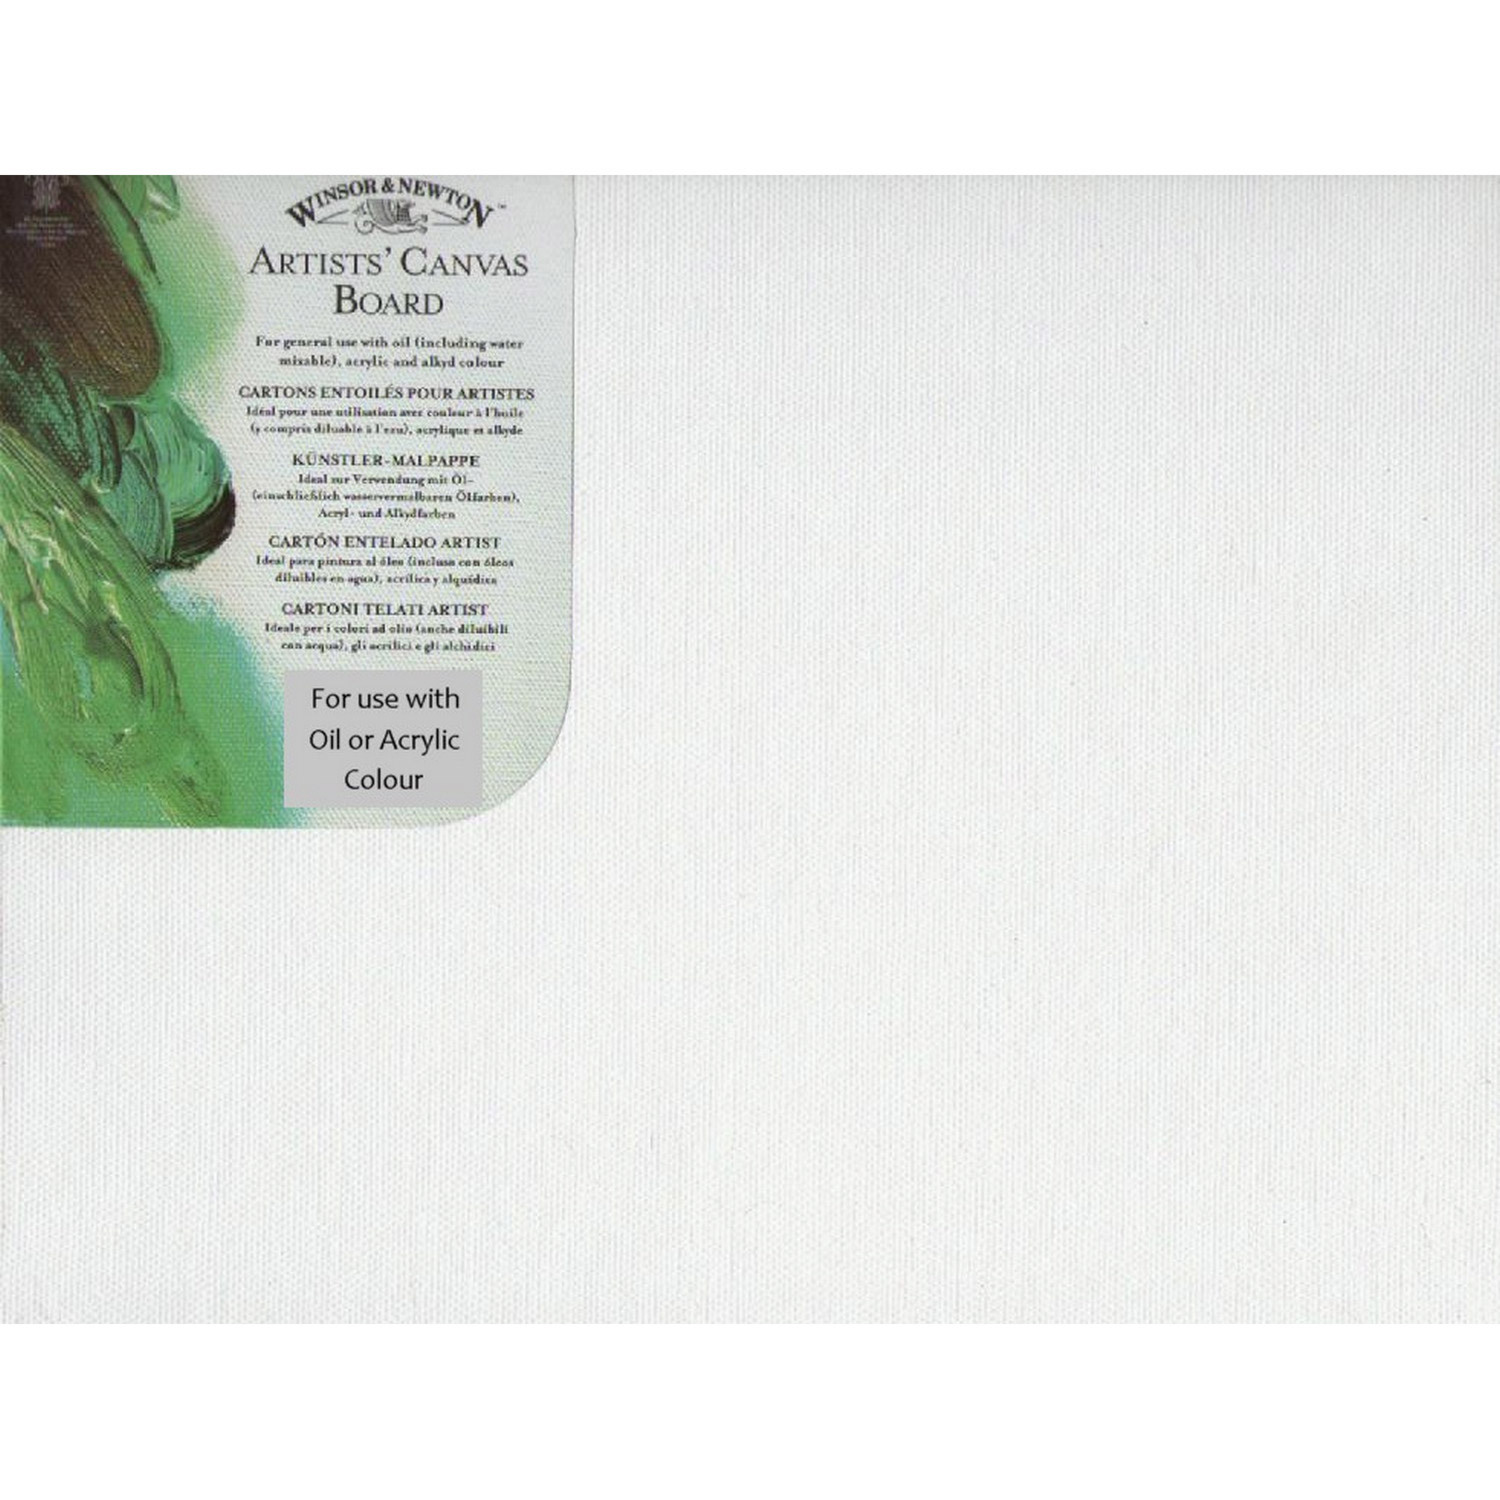 Winsor and Newton Artist's Canvas Boards - White / 18 x 13cm Image